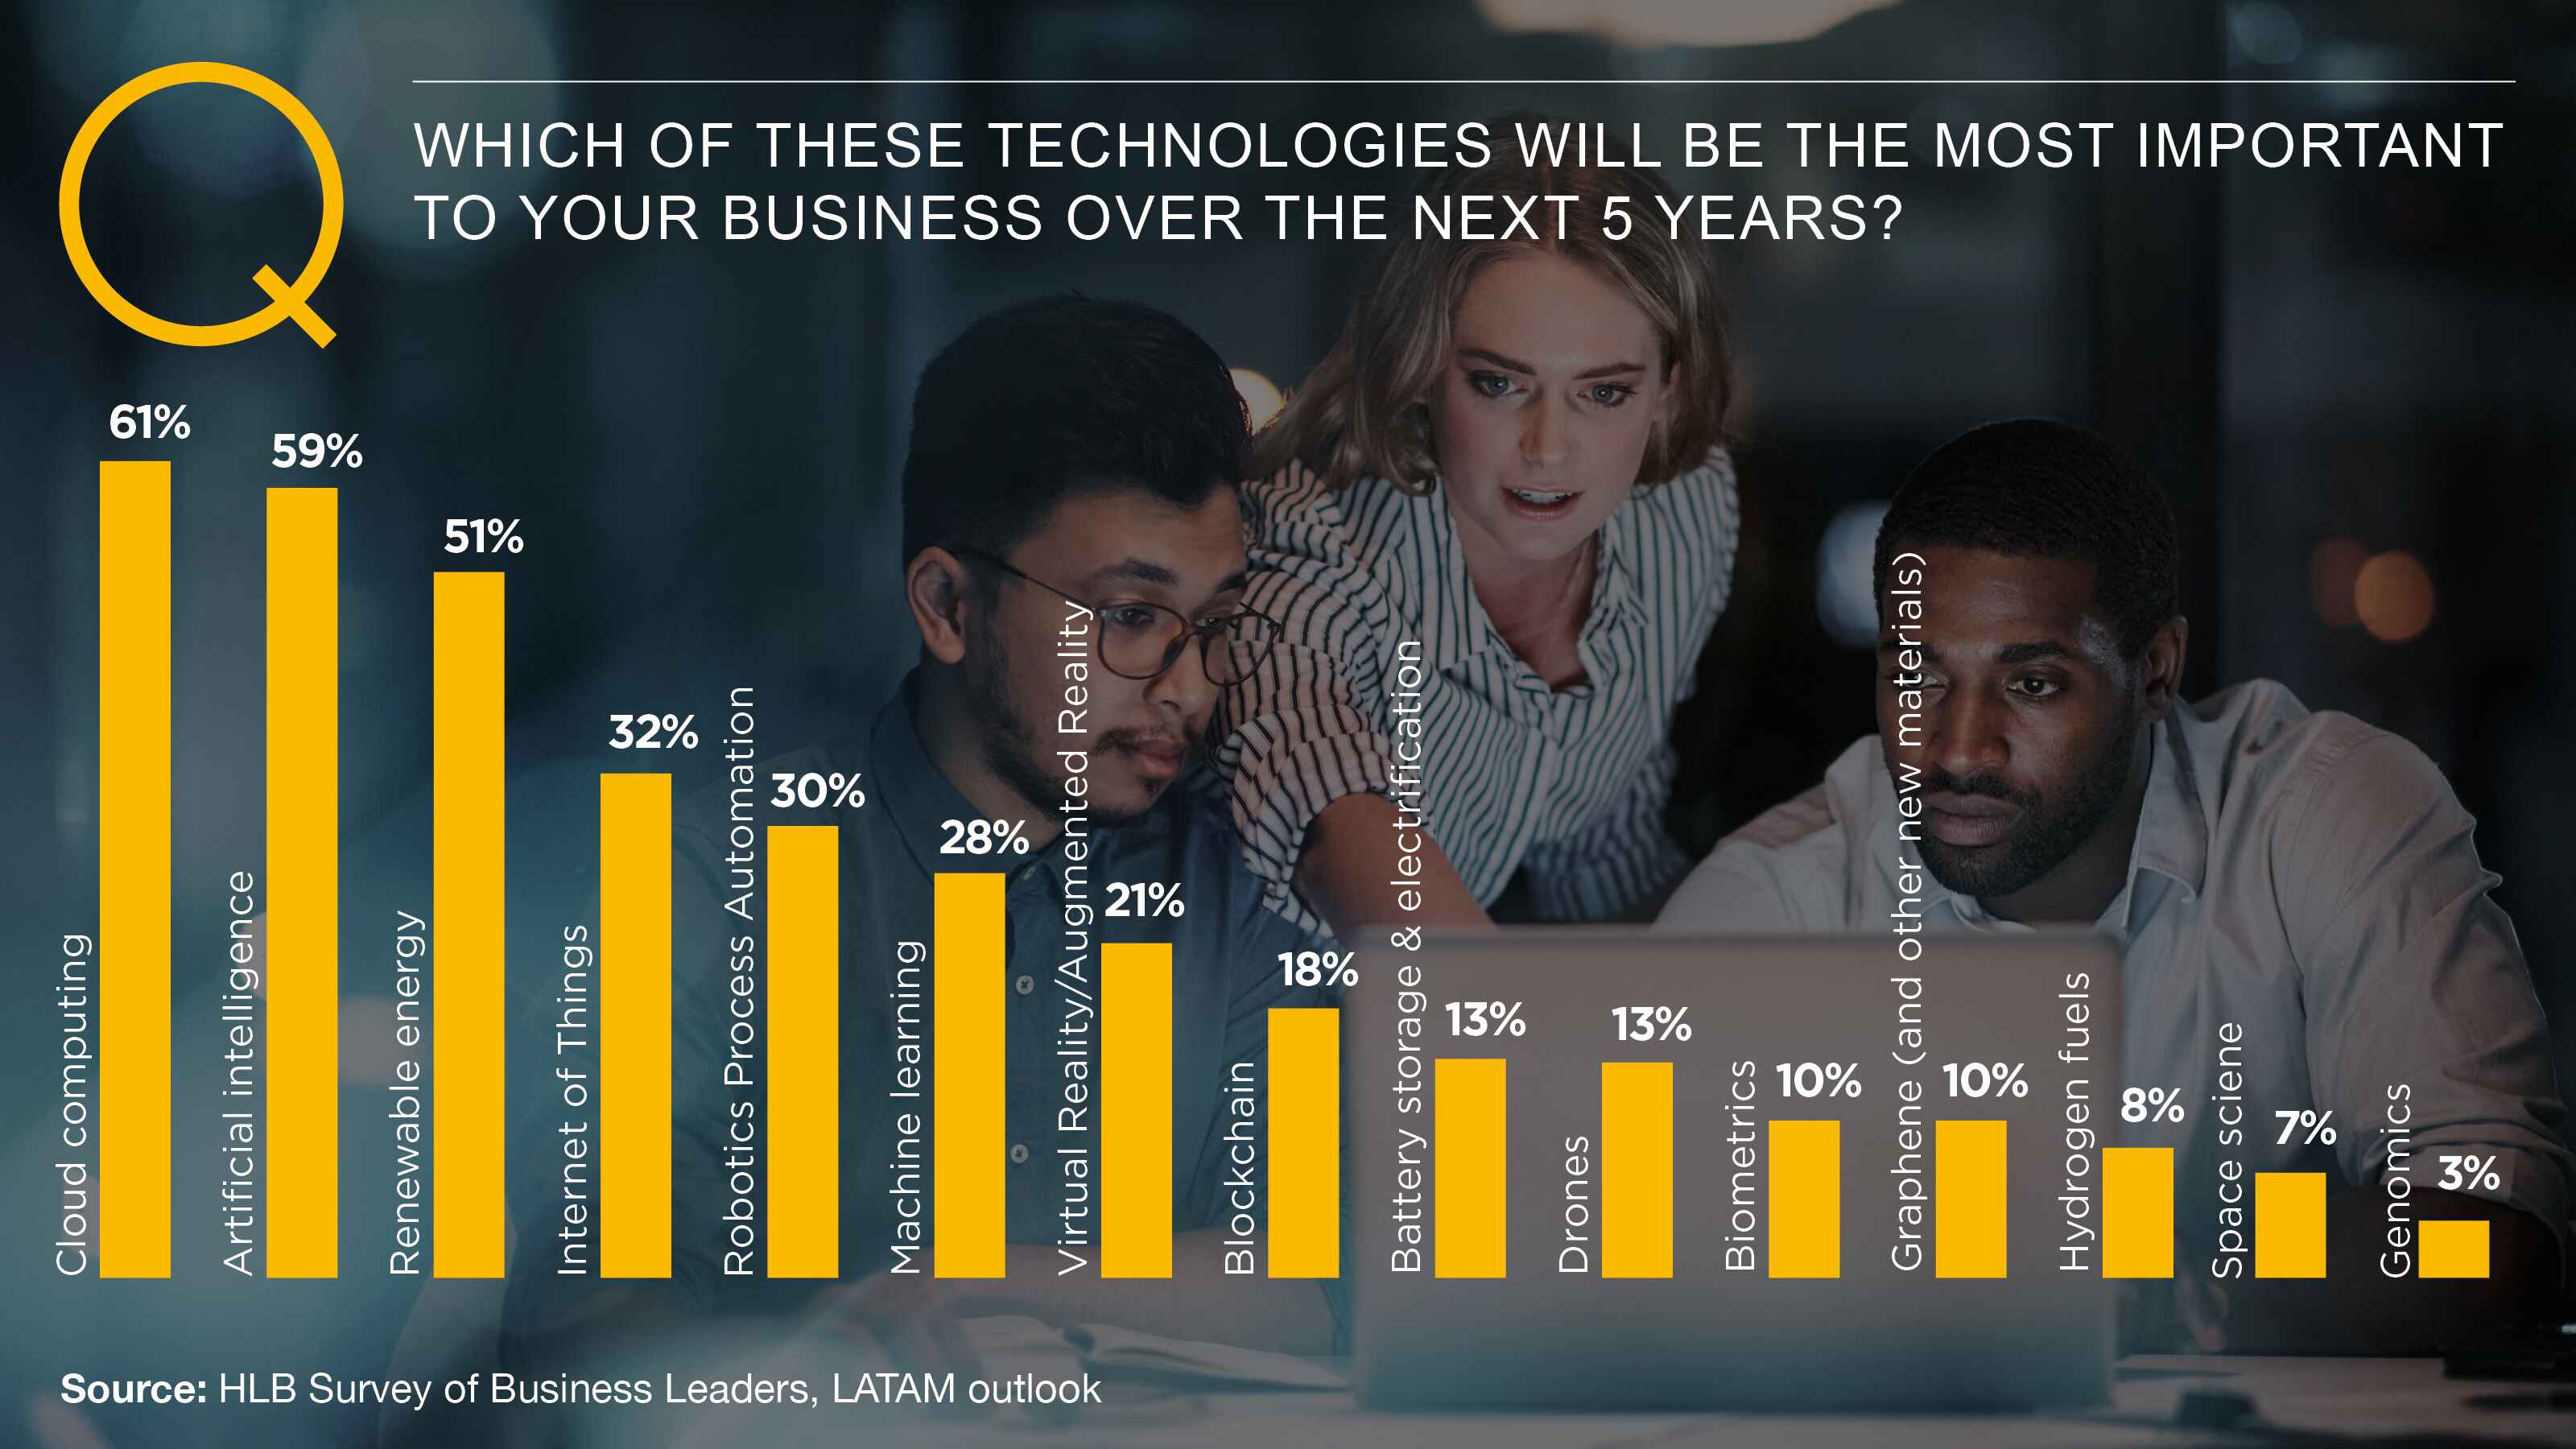 LATAM business leaders chart showcasing what technologies will be important over the next 5 years.